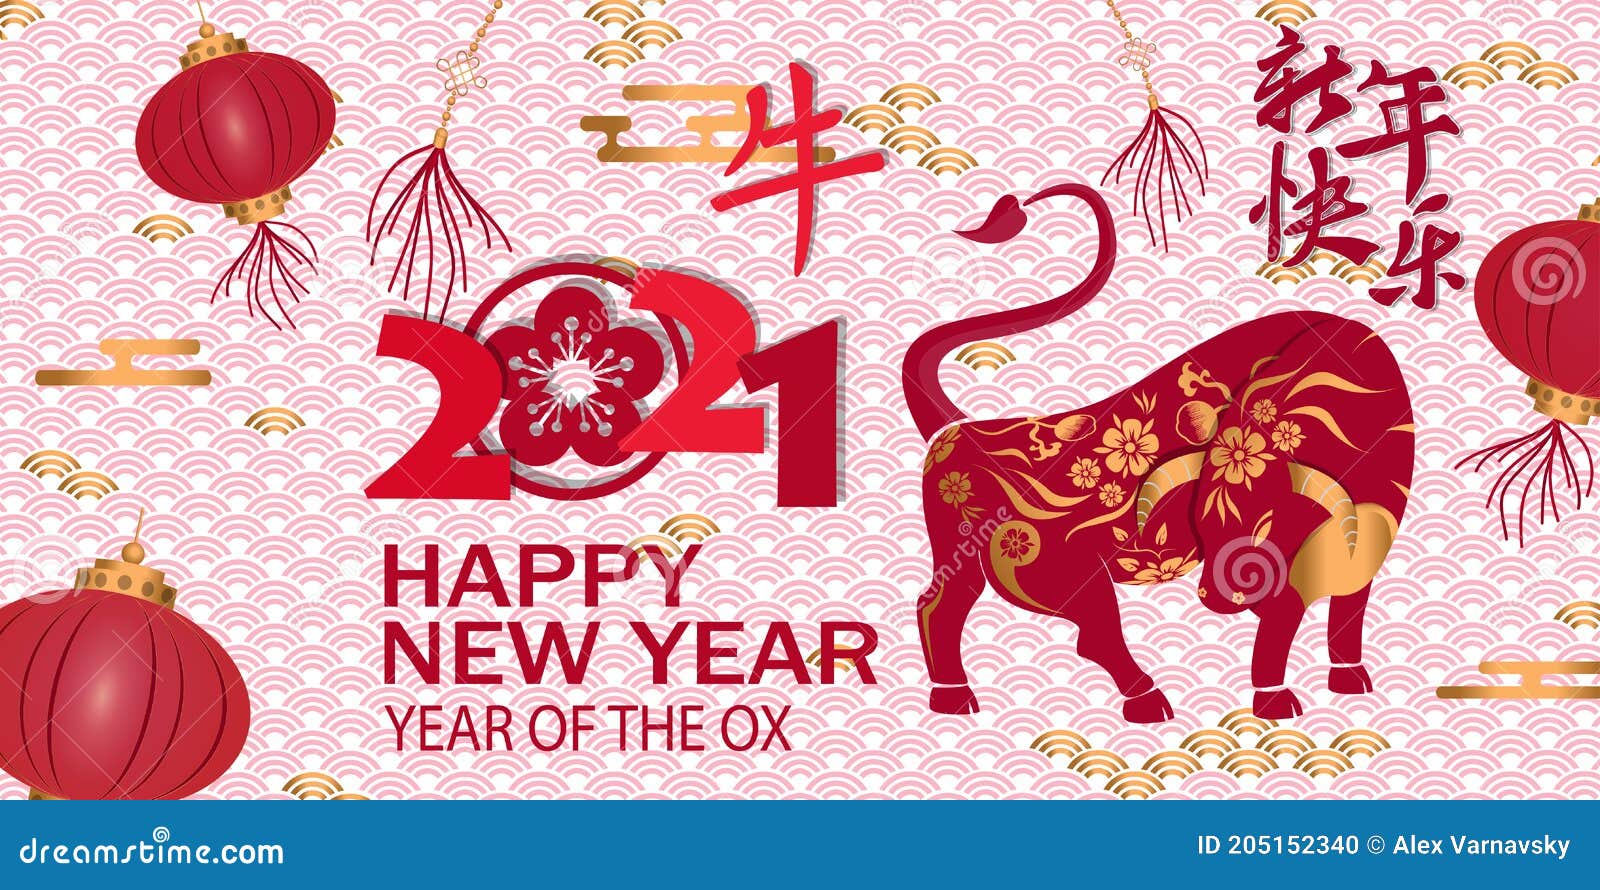 happy chinese new year 2021 traditional background with ox chinese translation chinese new year, ox